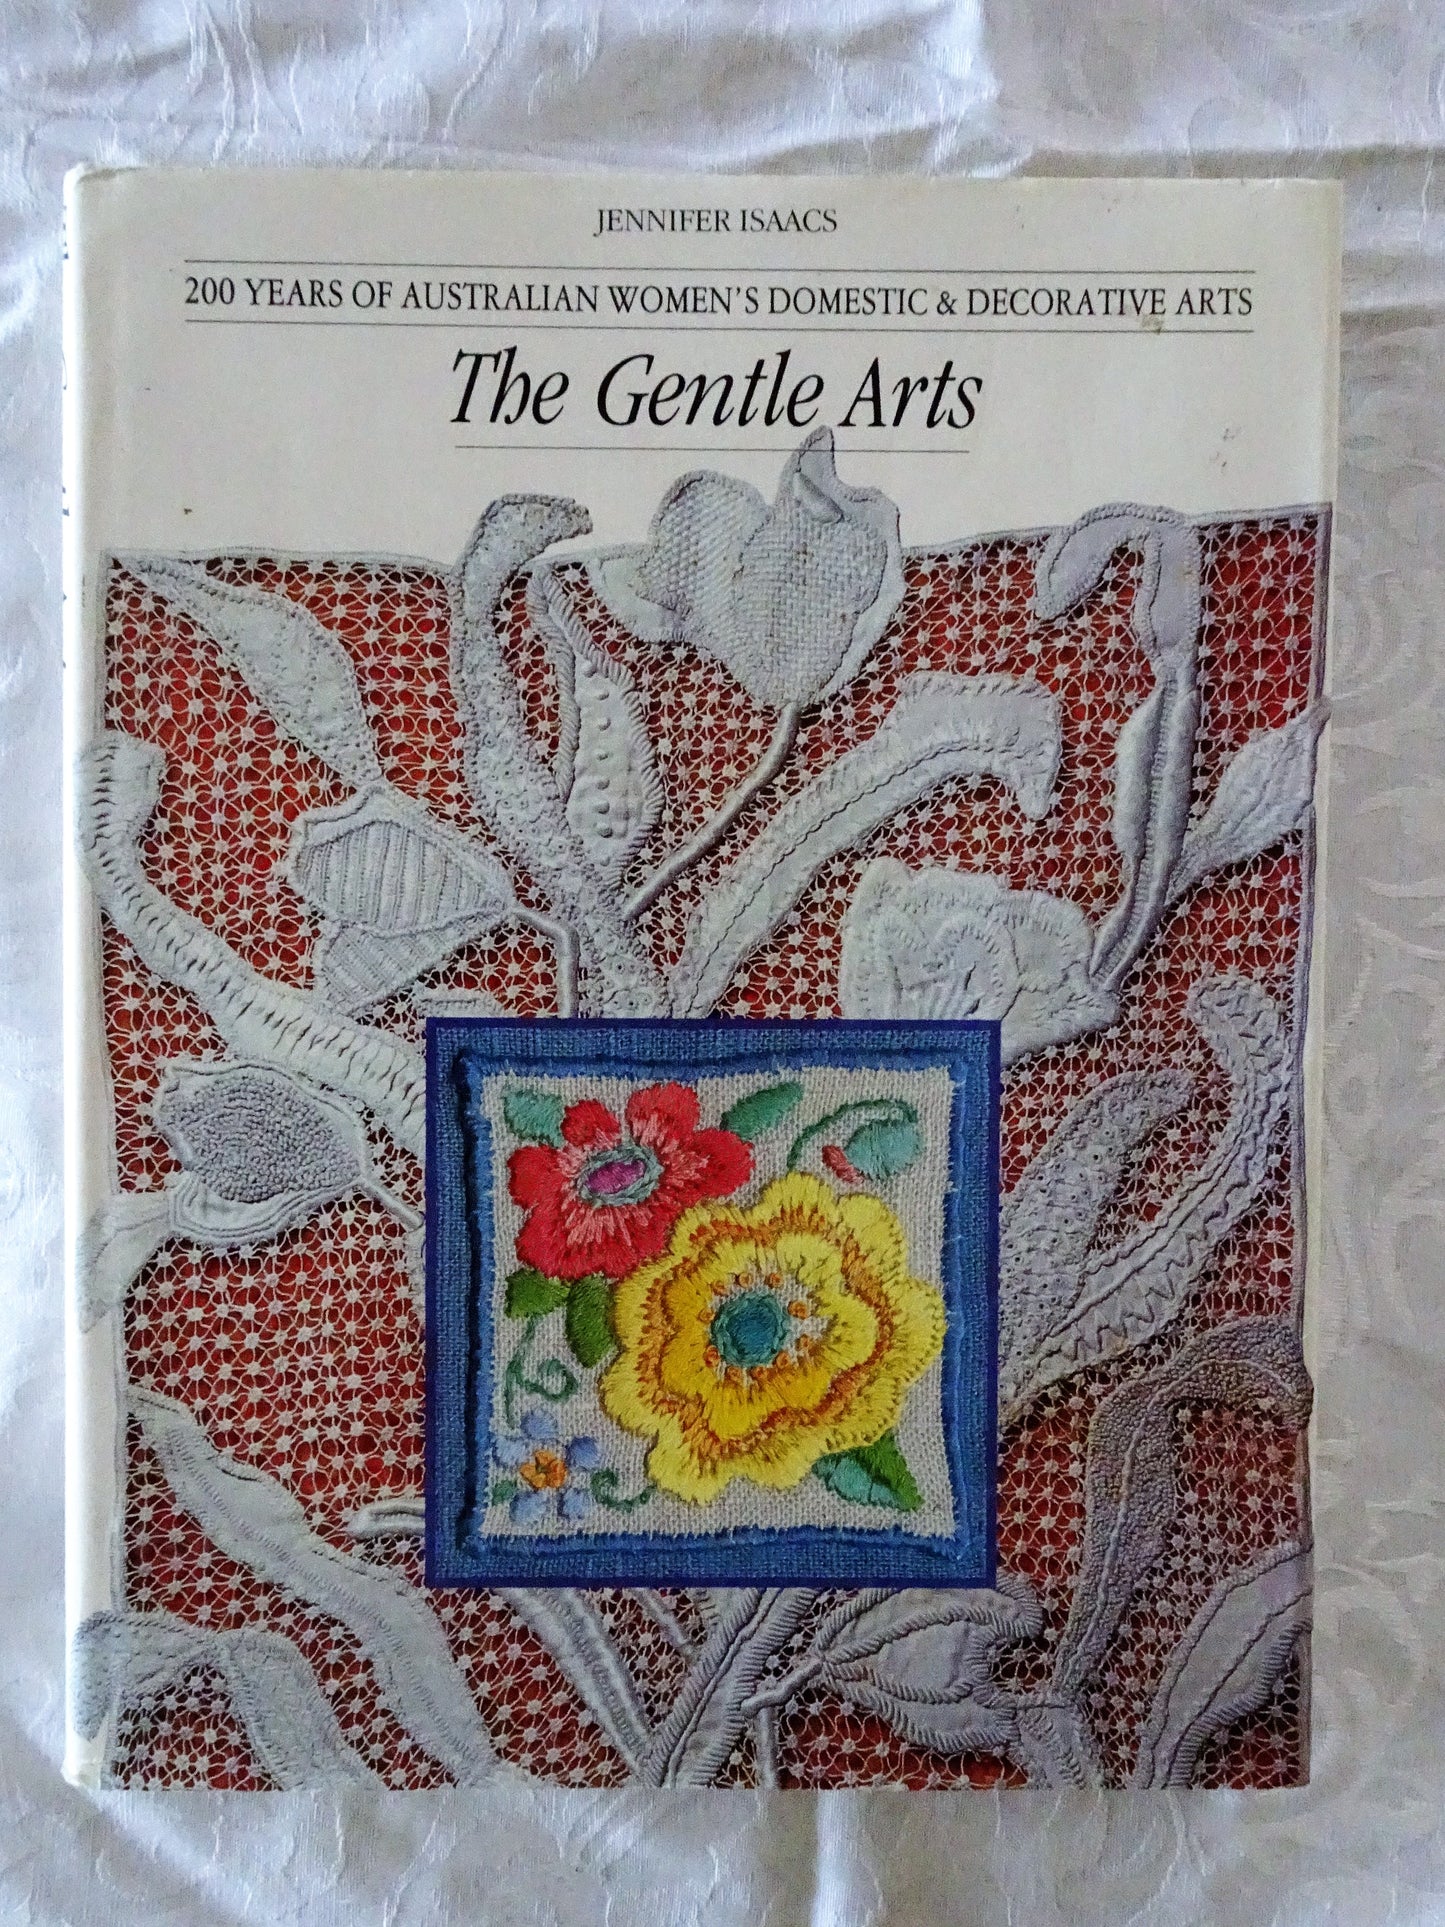 The Gentle Arts by Jennifer Isaacs